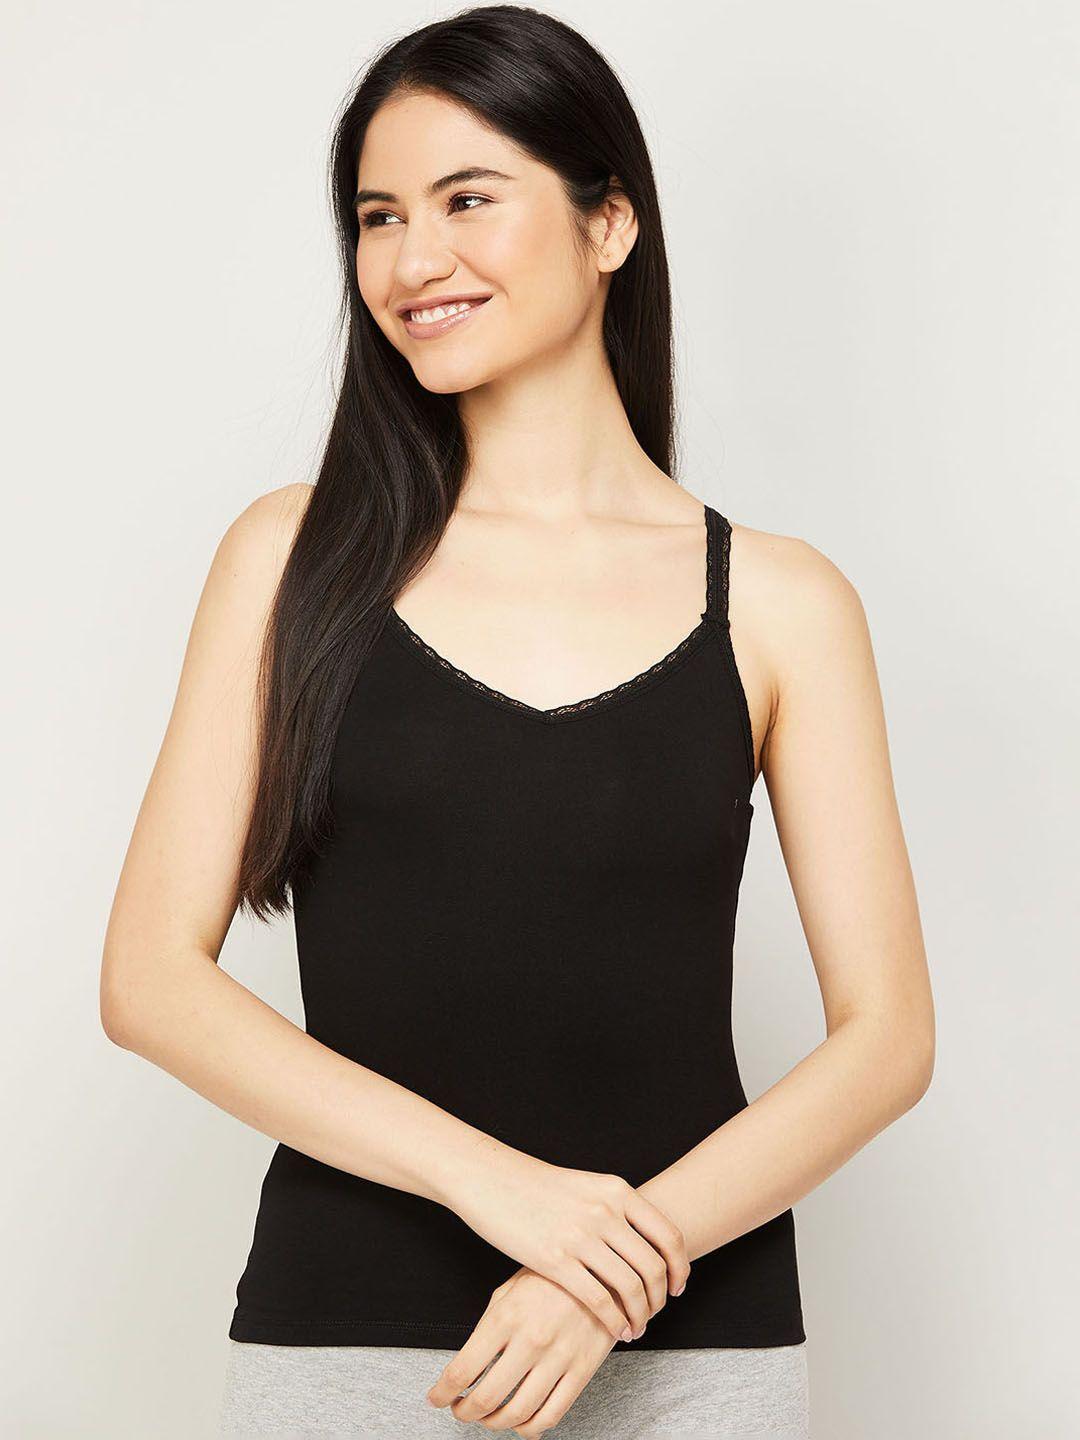 ginger-by-lifestyle-women-cotton-slip-camisole